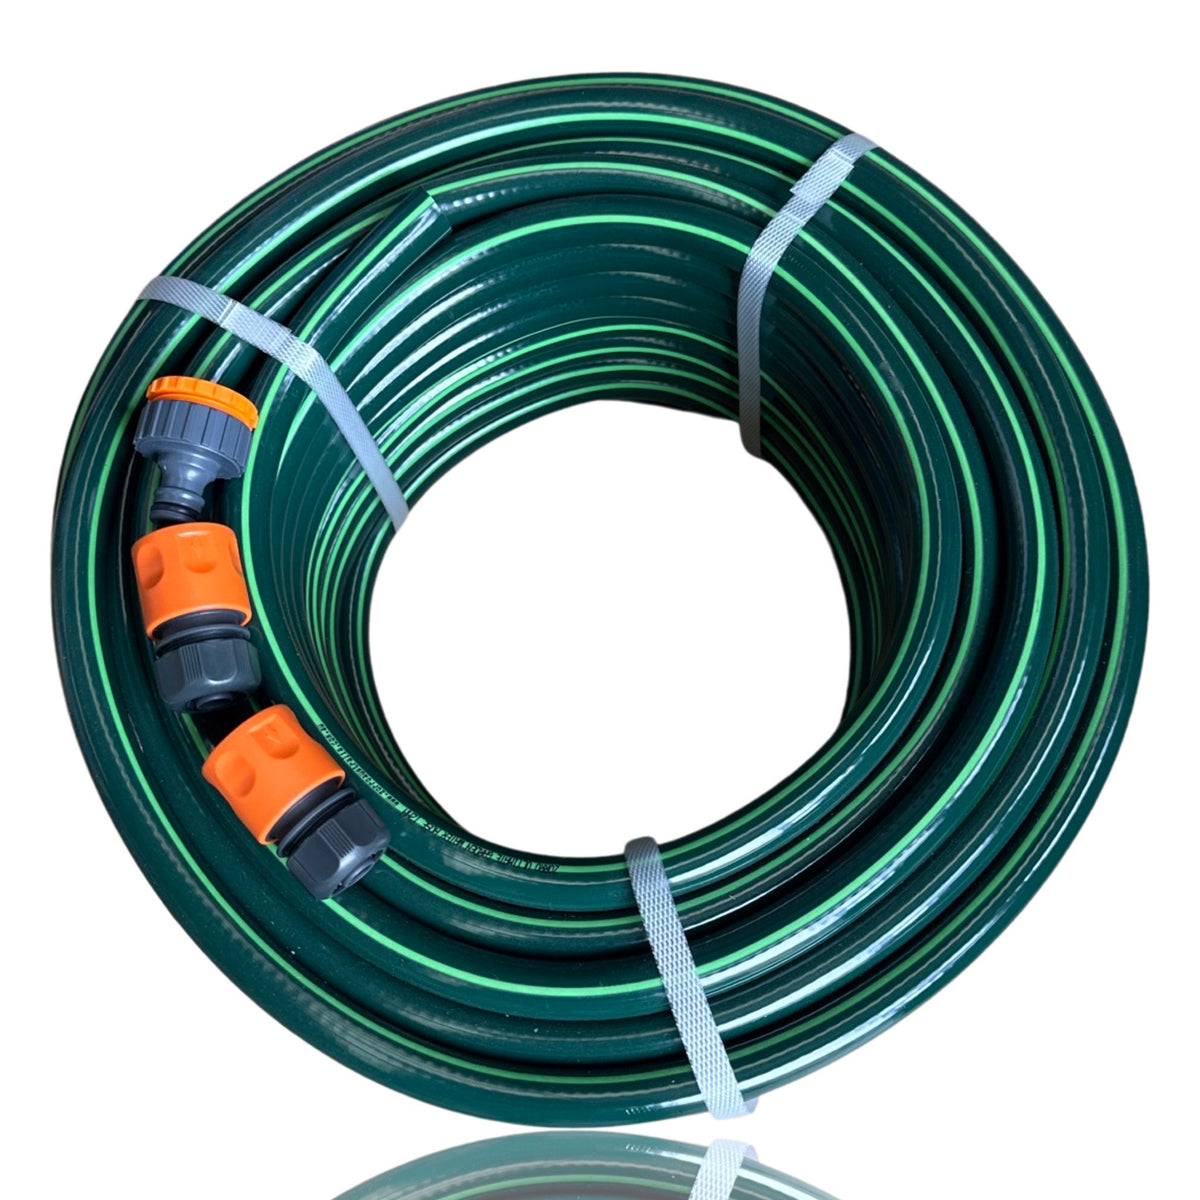 ZORRO Ultimate Garden Hose with 3 Piece Plastic Fittings 13mm